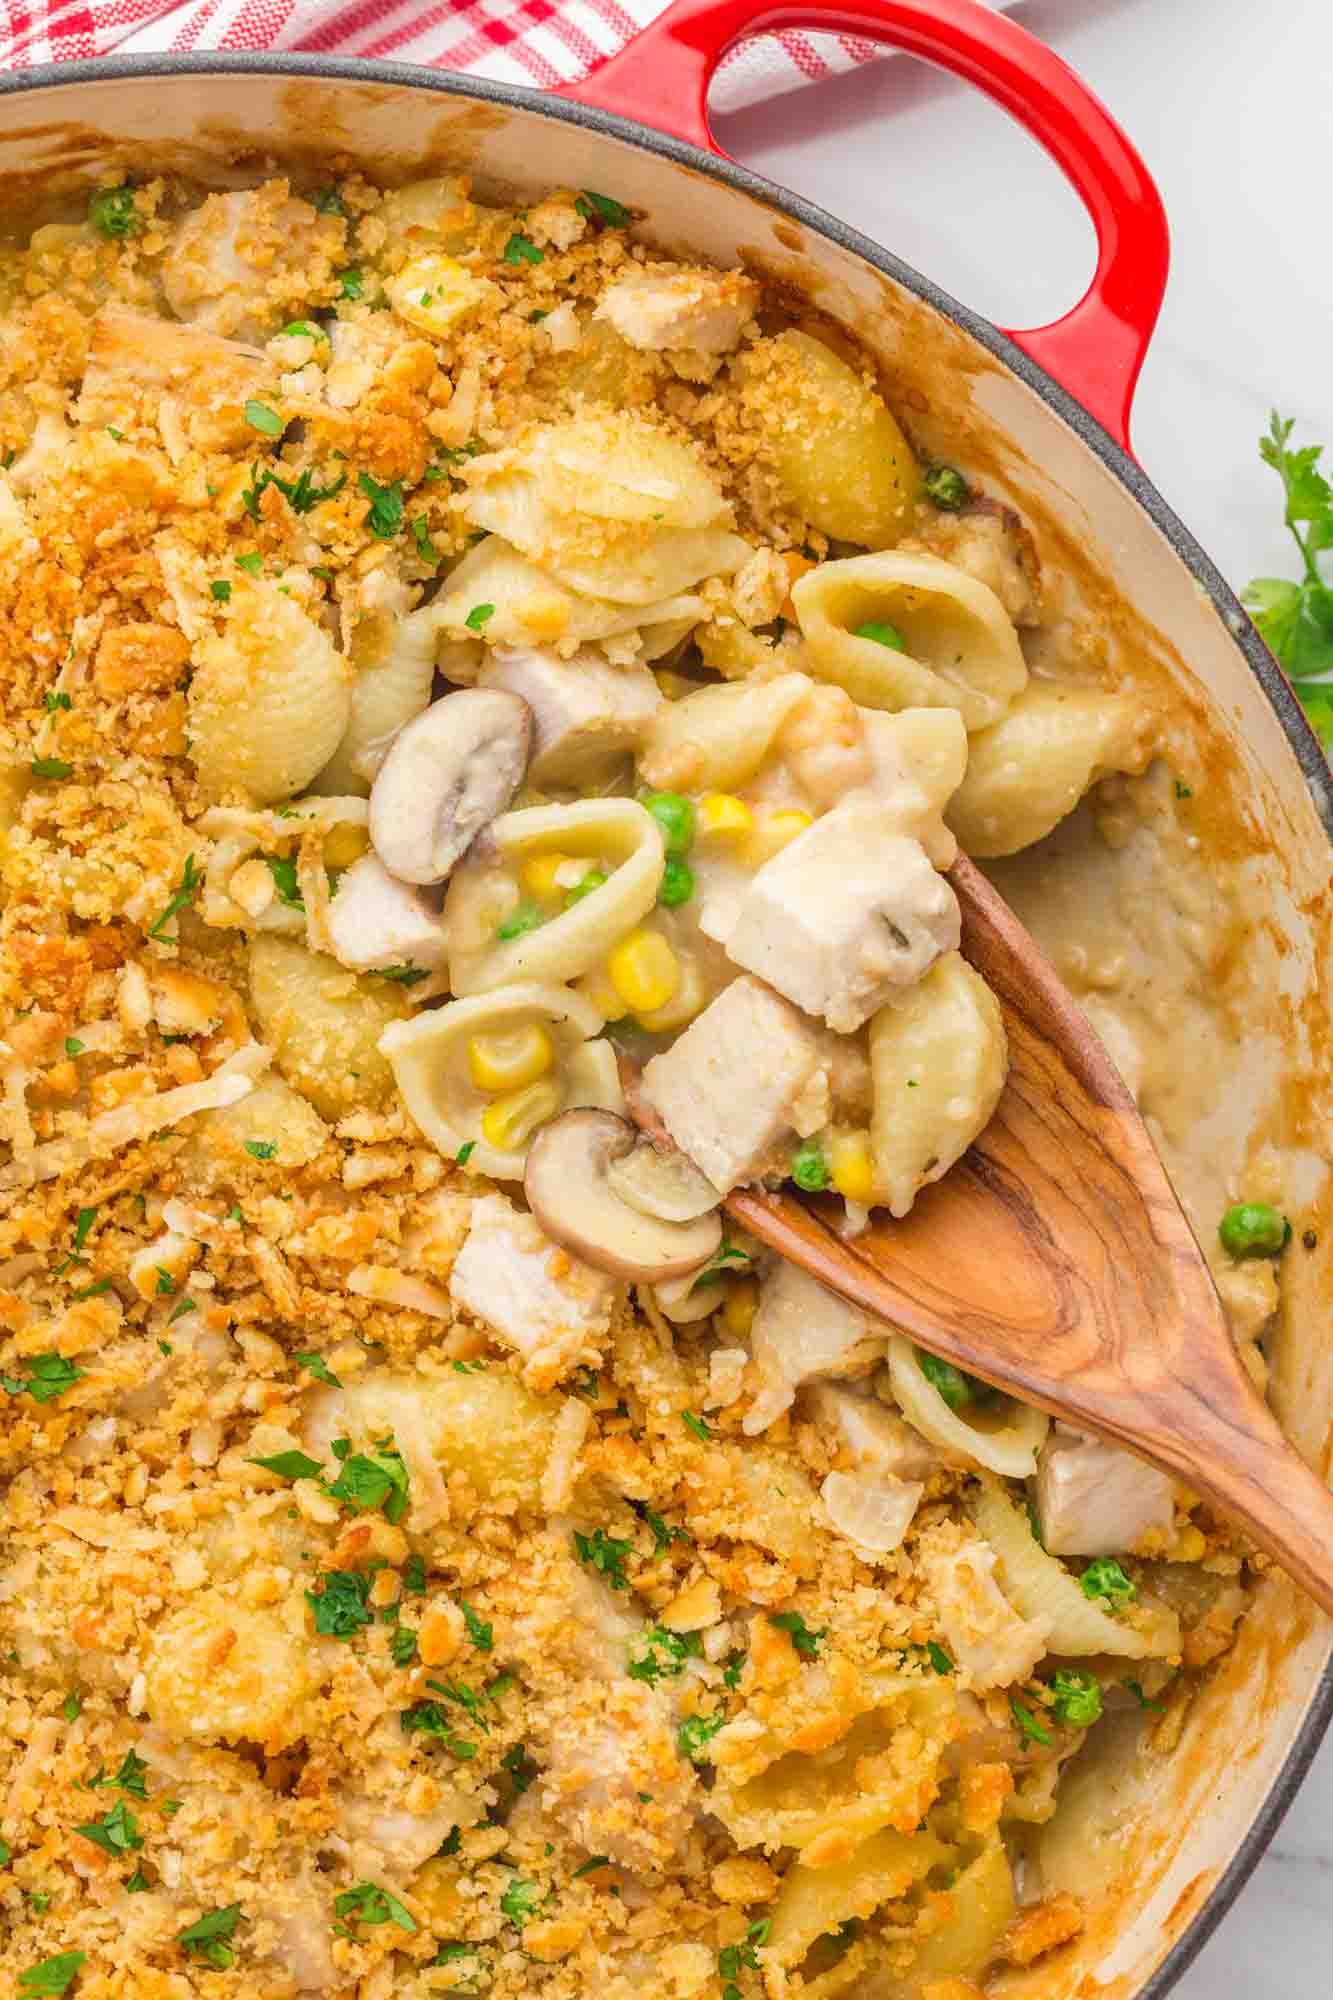 Overhead shot of a turkey casserole in a casserole dish with a wooden spoon